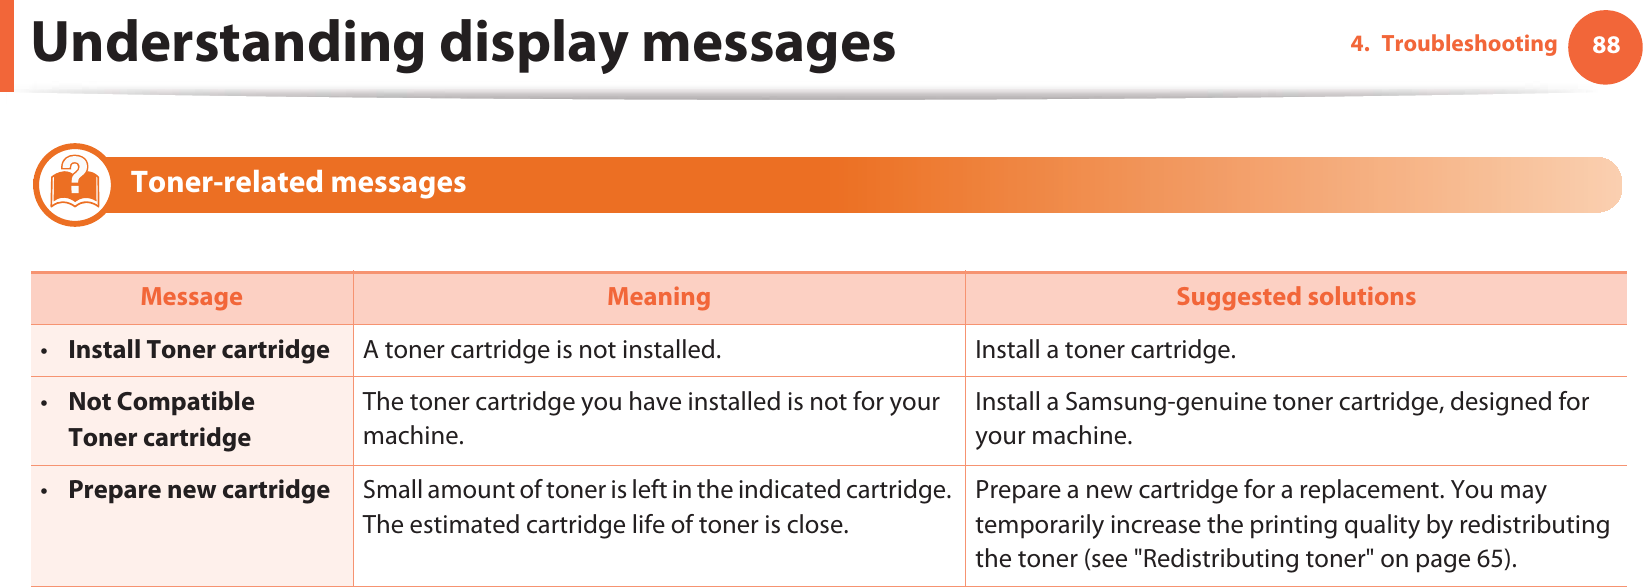 Understanding display messages 884. Troubleshooting10 Toner-related messages Message Meaning Suggested solutions•Install Toner cartridge A toner cartridge is not installed. Install a toner cartridge.•Not CompatibleToner cartridgeThe toner cartridge you have installed is not for your machine.Install a Samsung-genuine toner cartridge, designed for your machine.•Prepare new cartridge Small amount of toner is left in the indicated cartridge. The estimated cartridge life of toner is close.Prepare a new cartridge for a replacement. You may temporarily increase the printing quality by redistributing the toner (see &quot;Redistributing toner&quot; on page 65).